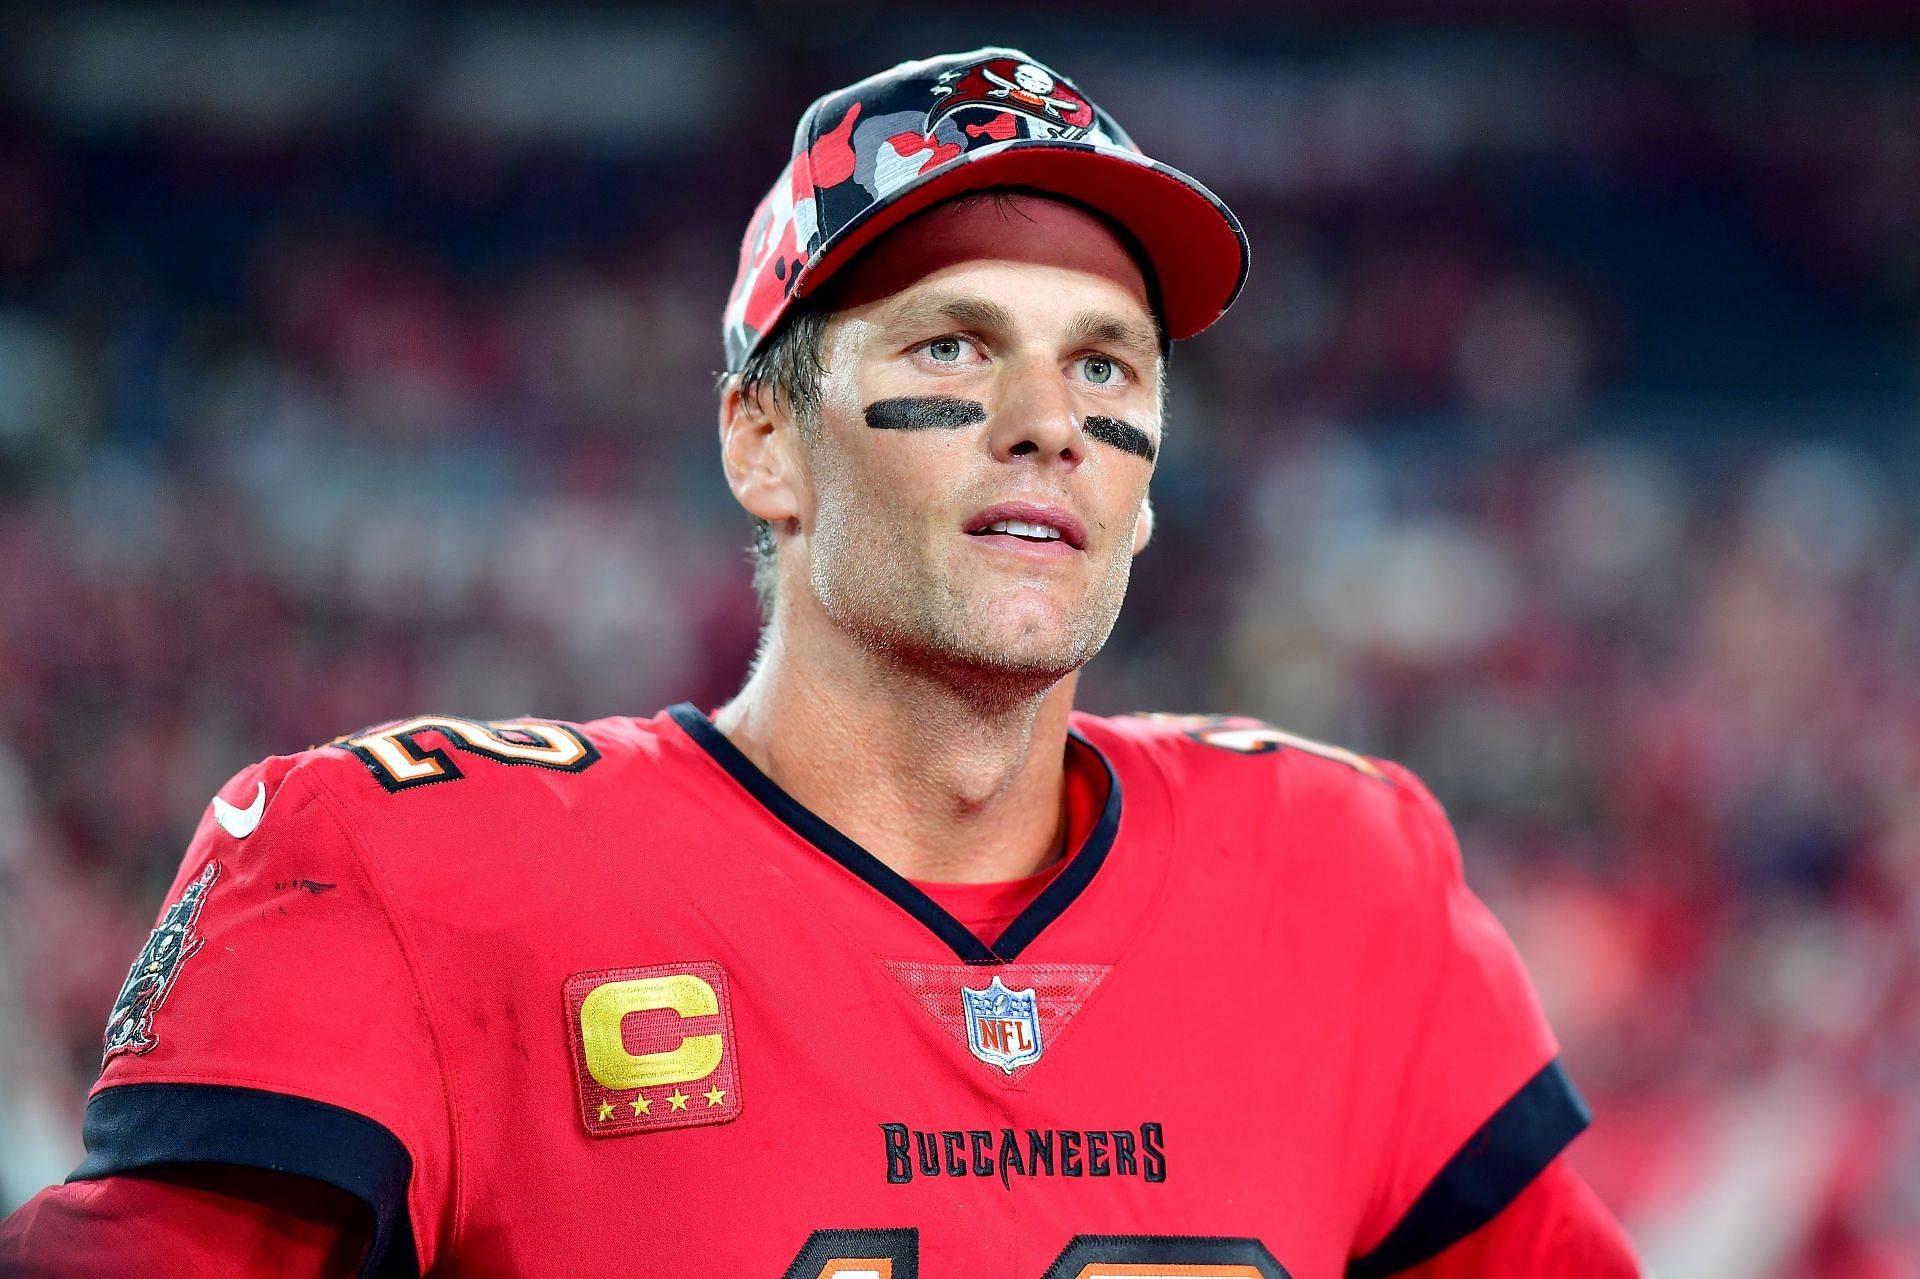 Tom Brady hilariously tries to recruit MLB free agent superstar Aaron Judge  to come play tight end for the Buccaneers